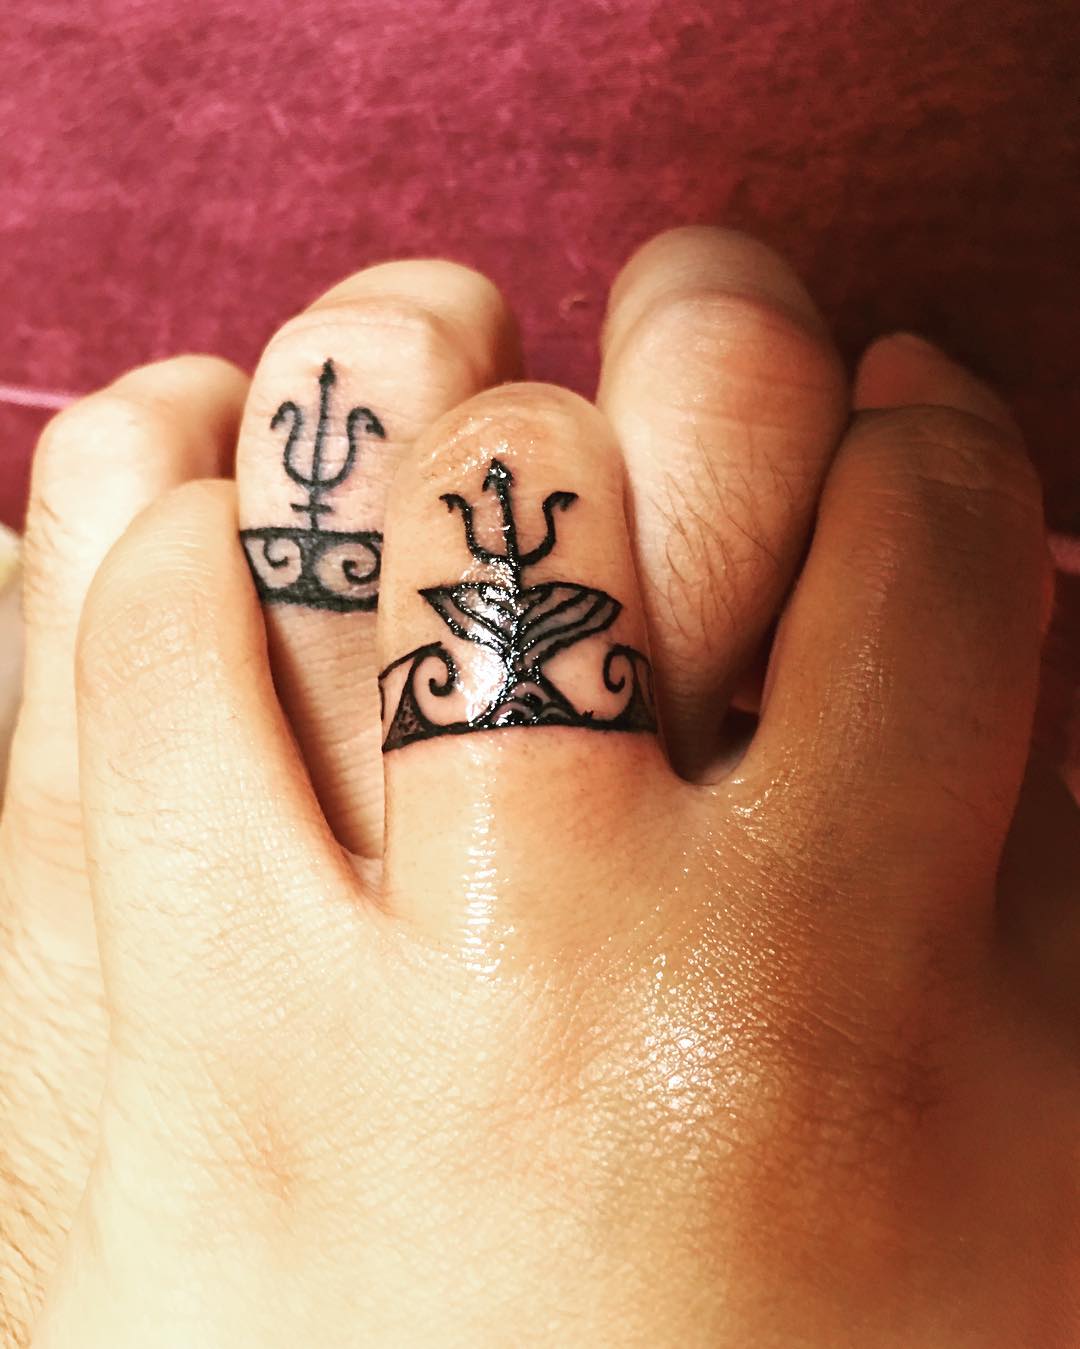 Tattoo Ideas for the Hands, Fingers, and Palms - TatRing